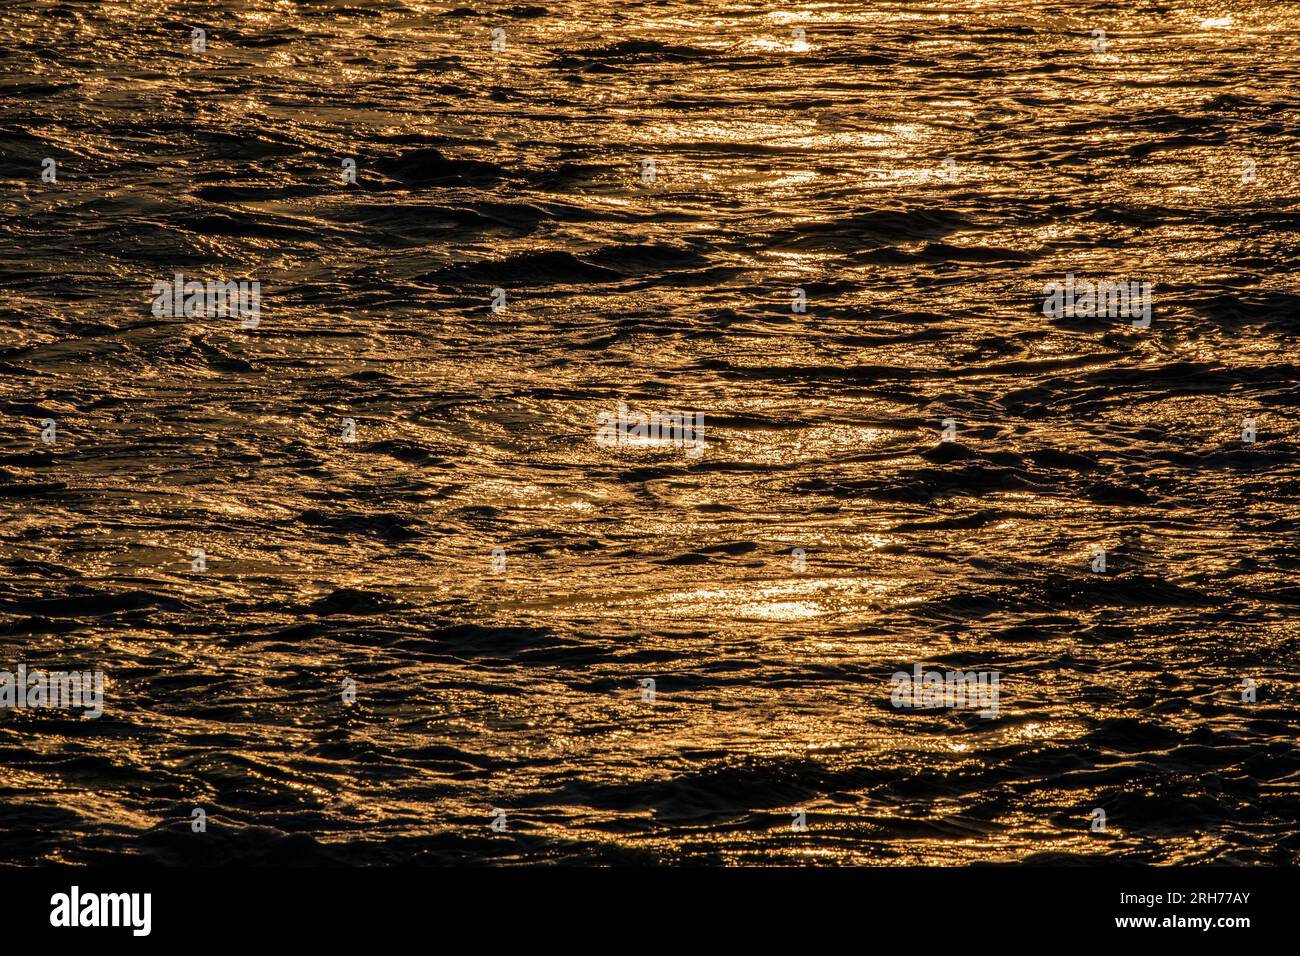 Sun shimmering on the ocean waves at sunset creating a beautiful abstract background Stock Photo